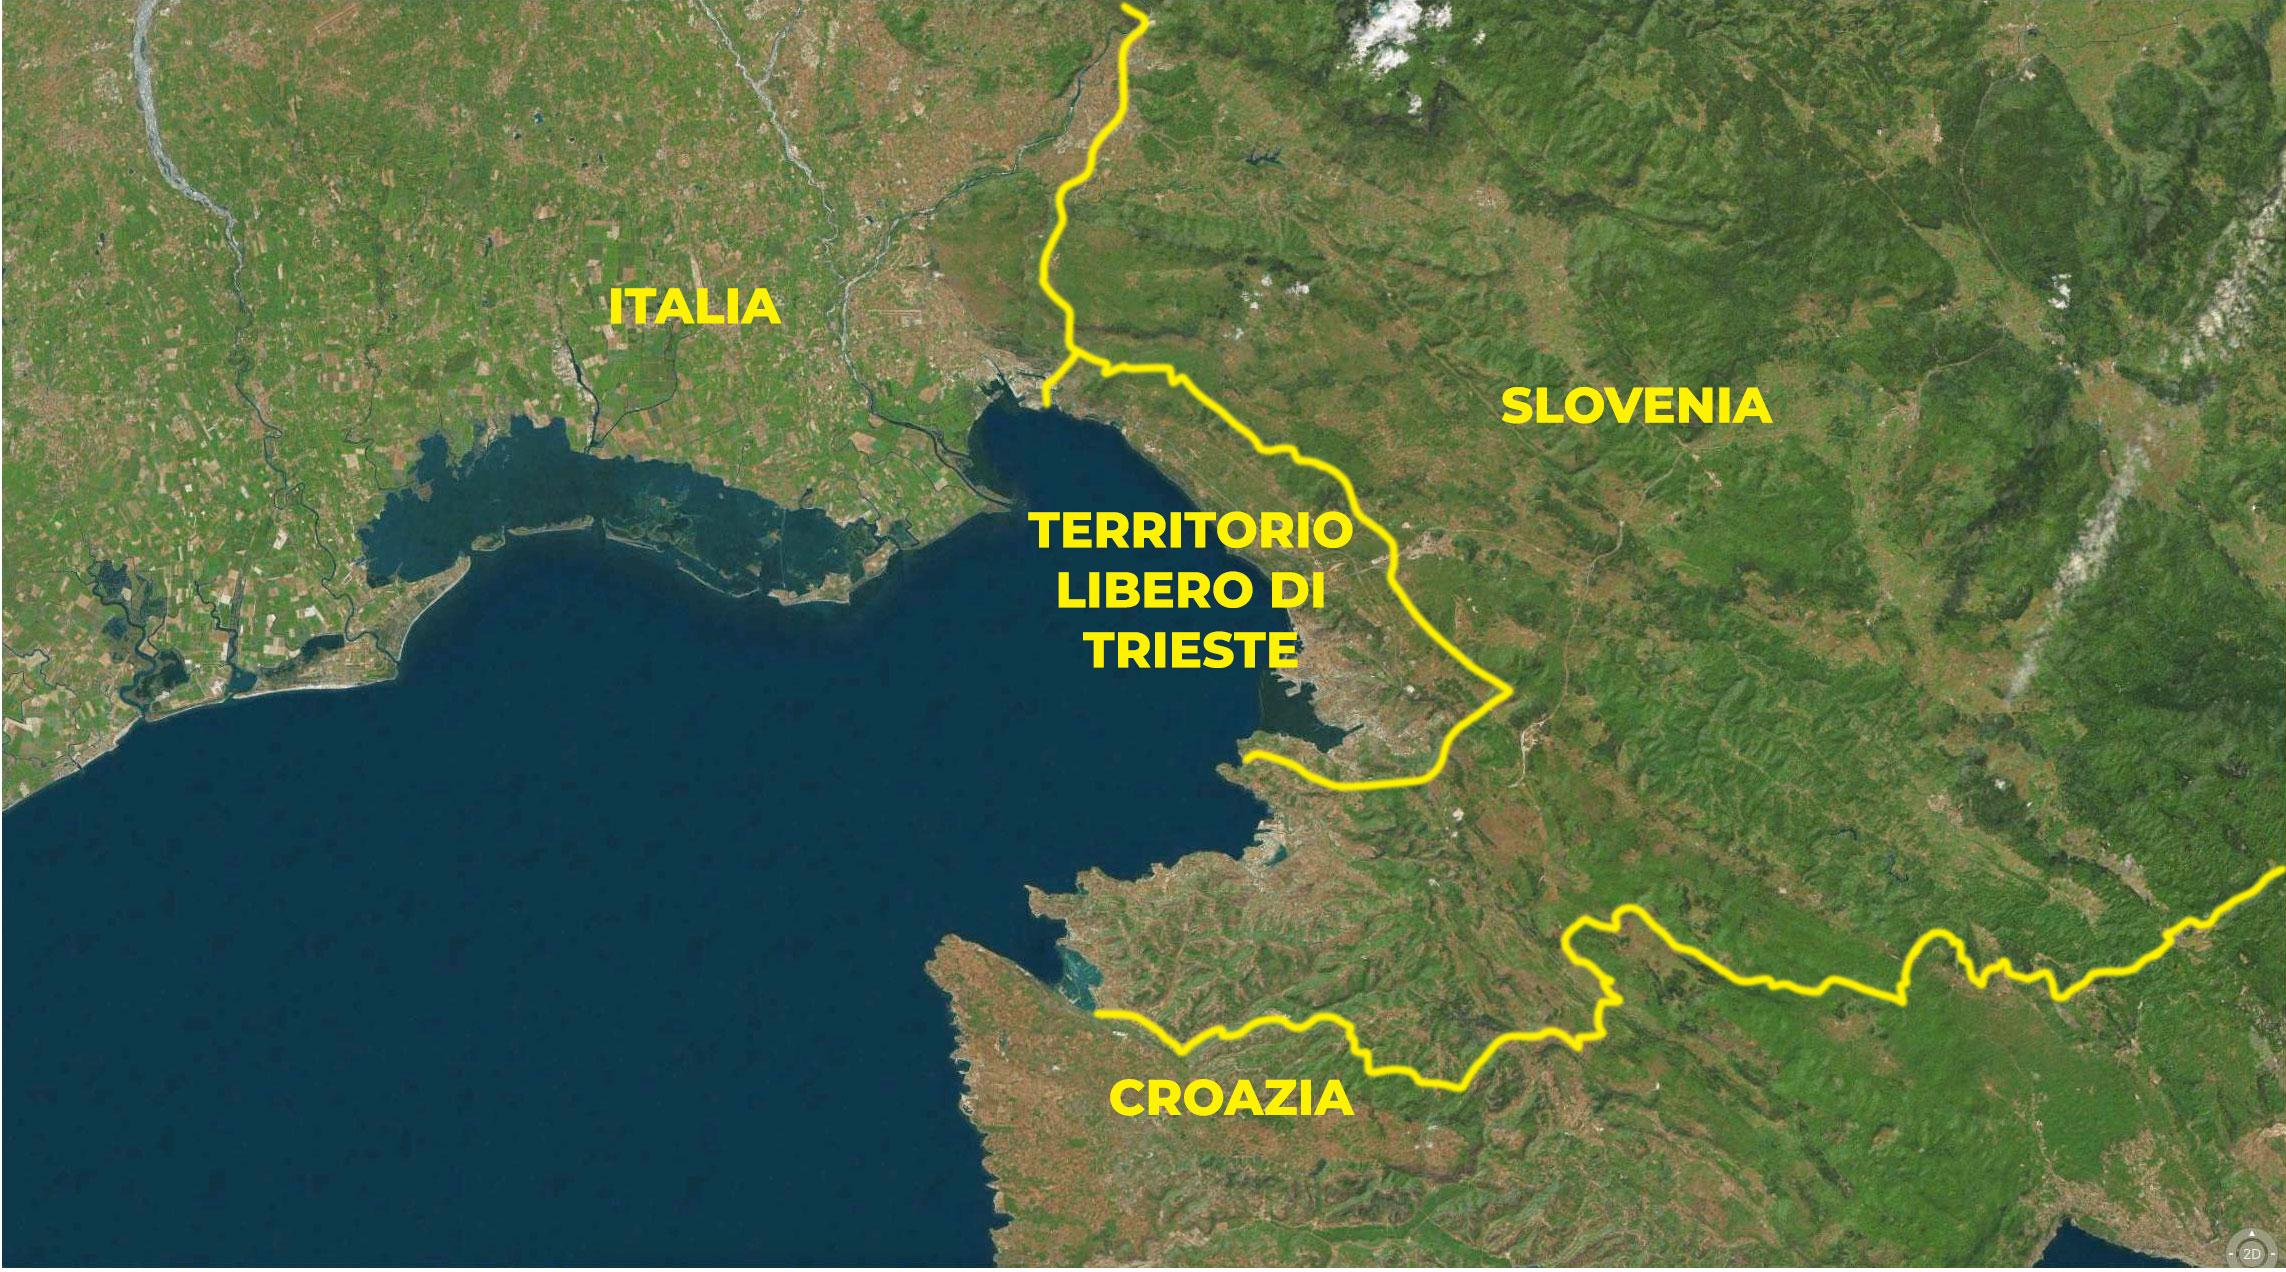 The present-day Free Territory of Trieste (since 1992).